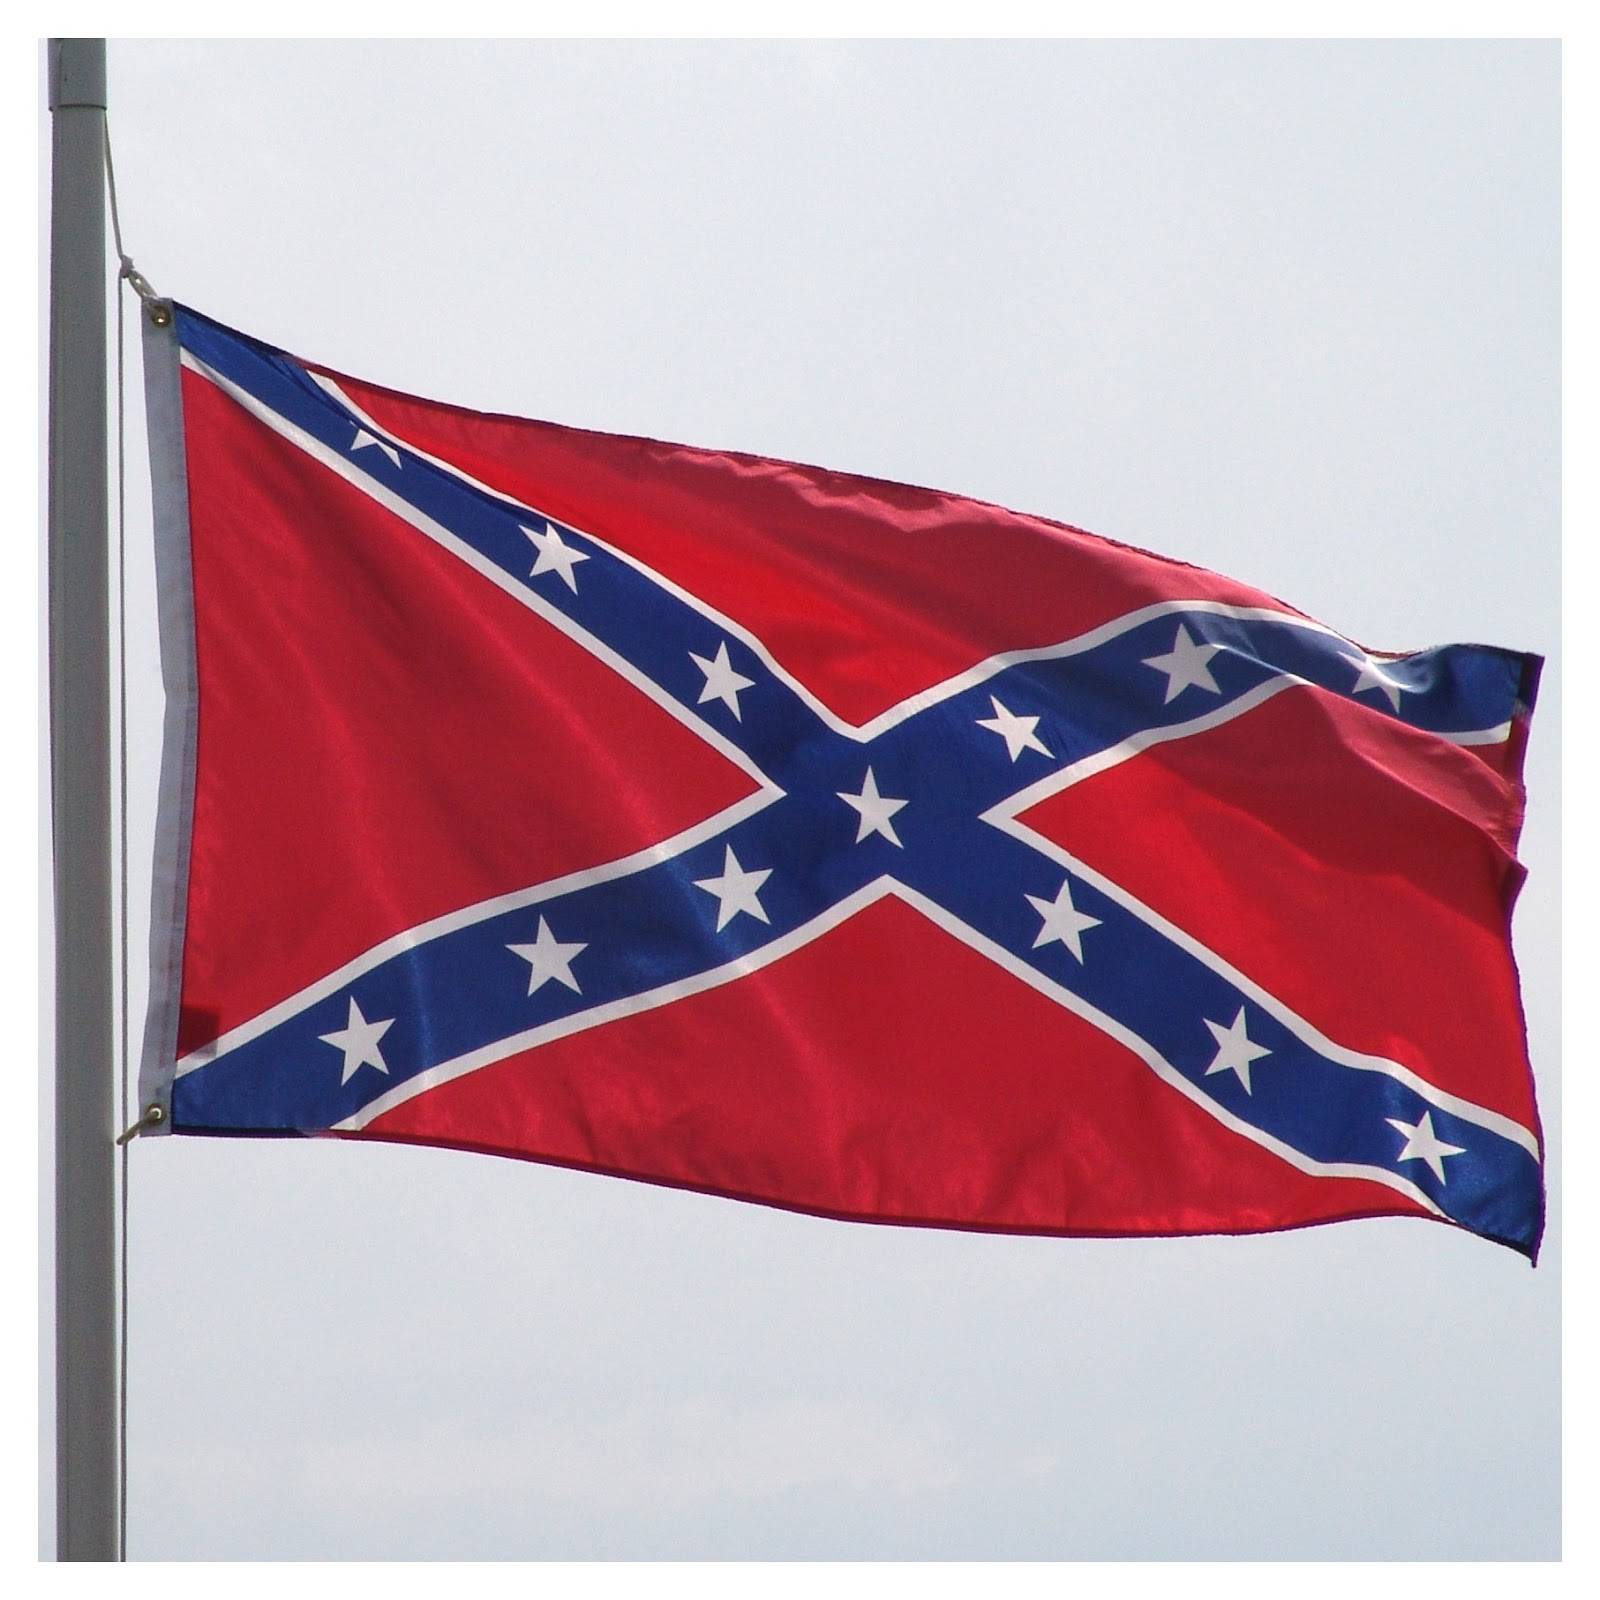 The News UNIT: Obama on The Confederate (Rebel) Flag